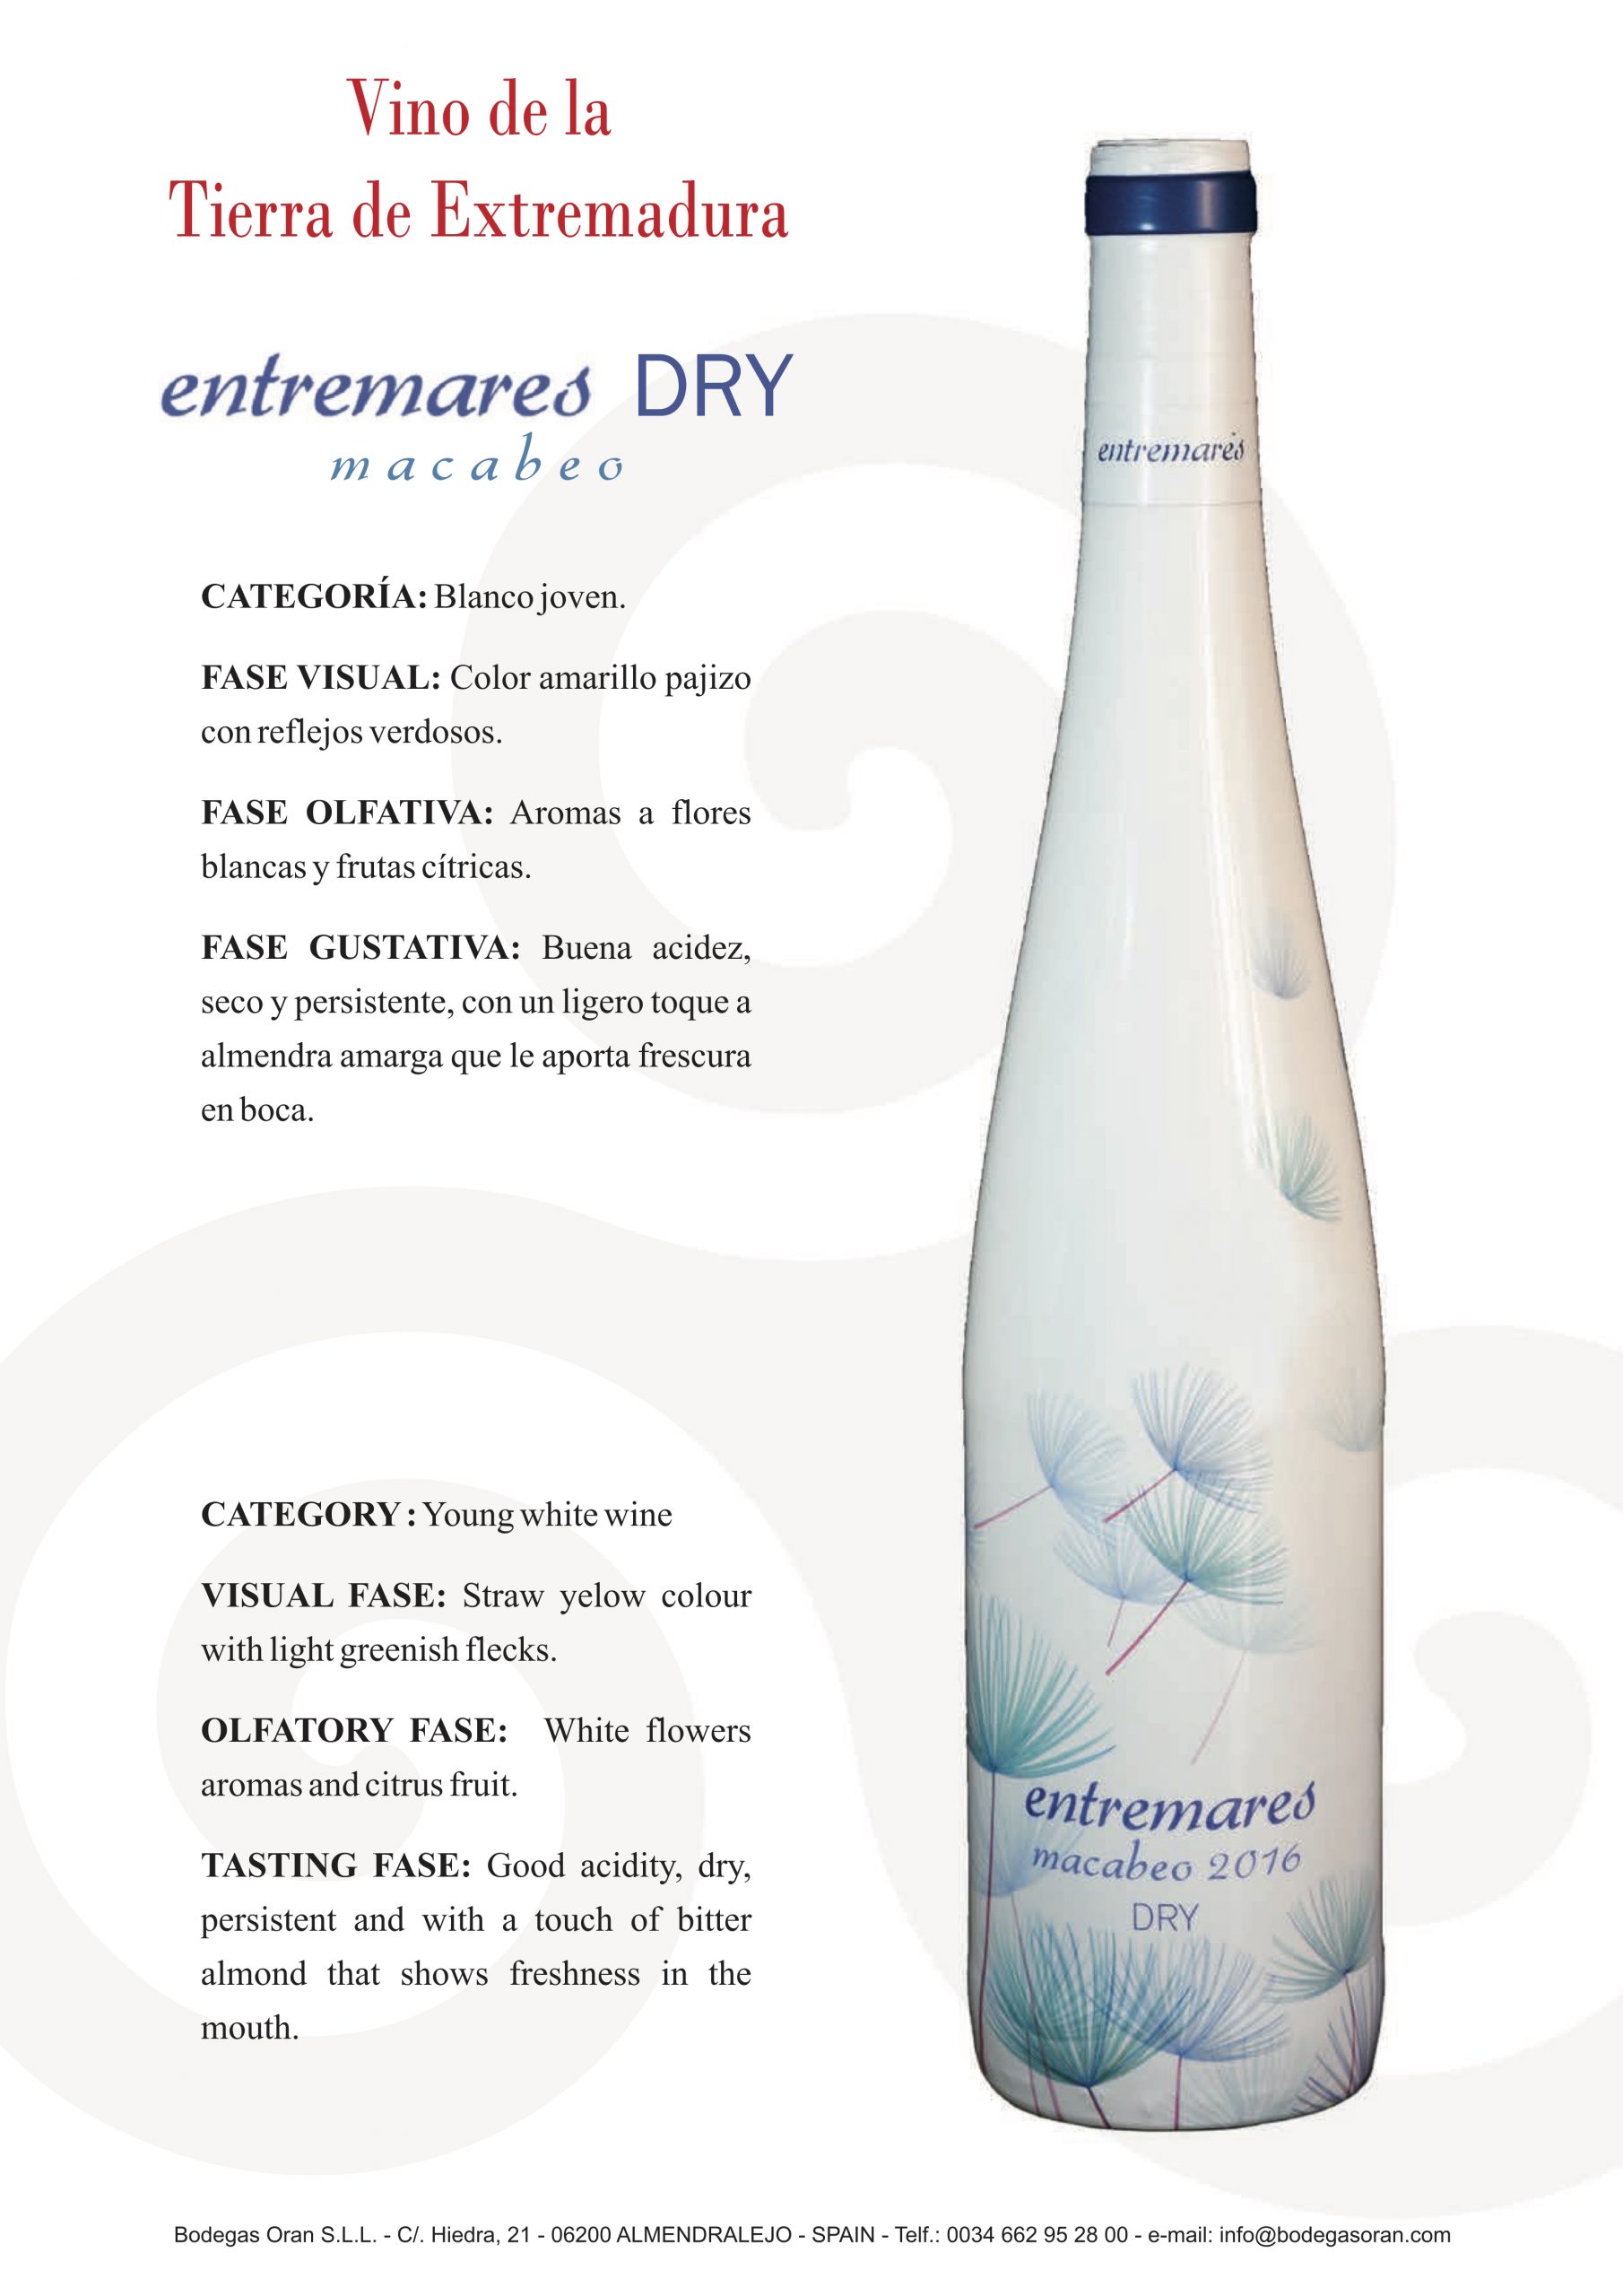 Entremares DRY Macabeo